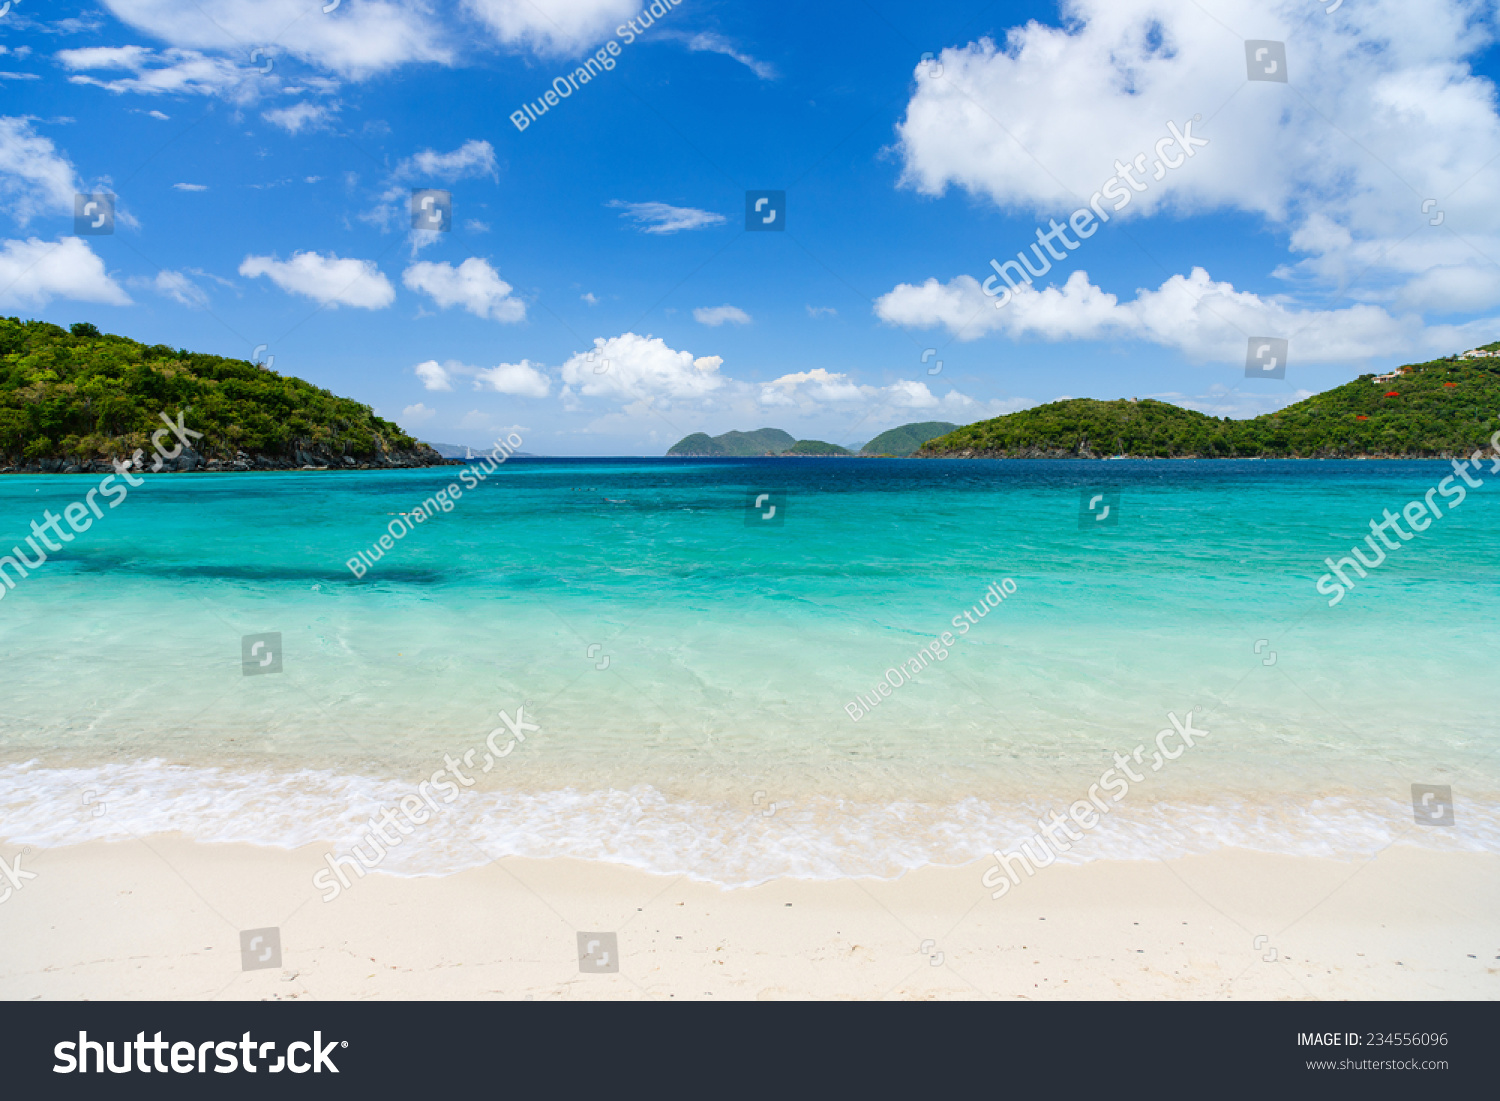 Beautiful tropical beach with white sand, turquoise ocean water and blue sky at St John, US Virgin Islands in Caribbean #234556096